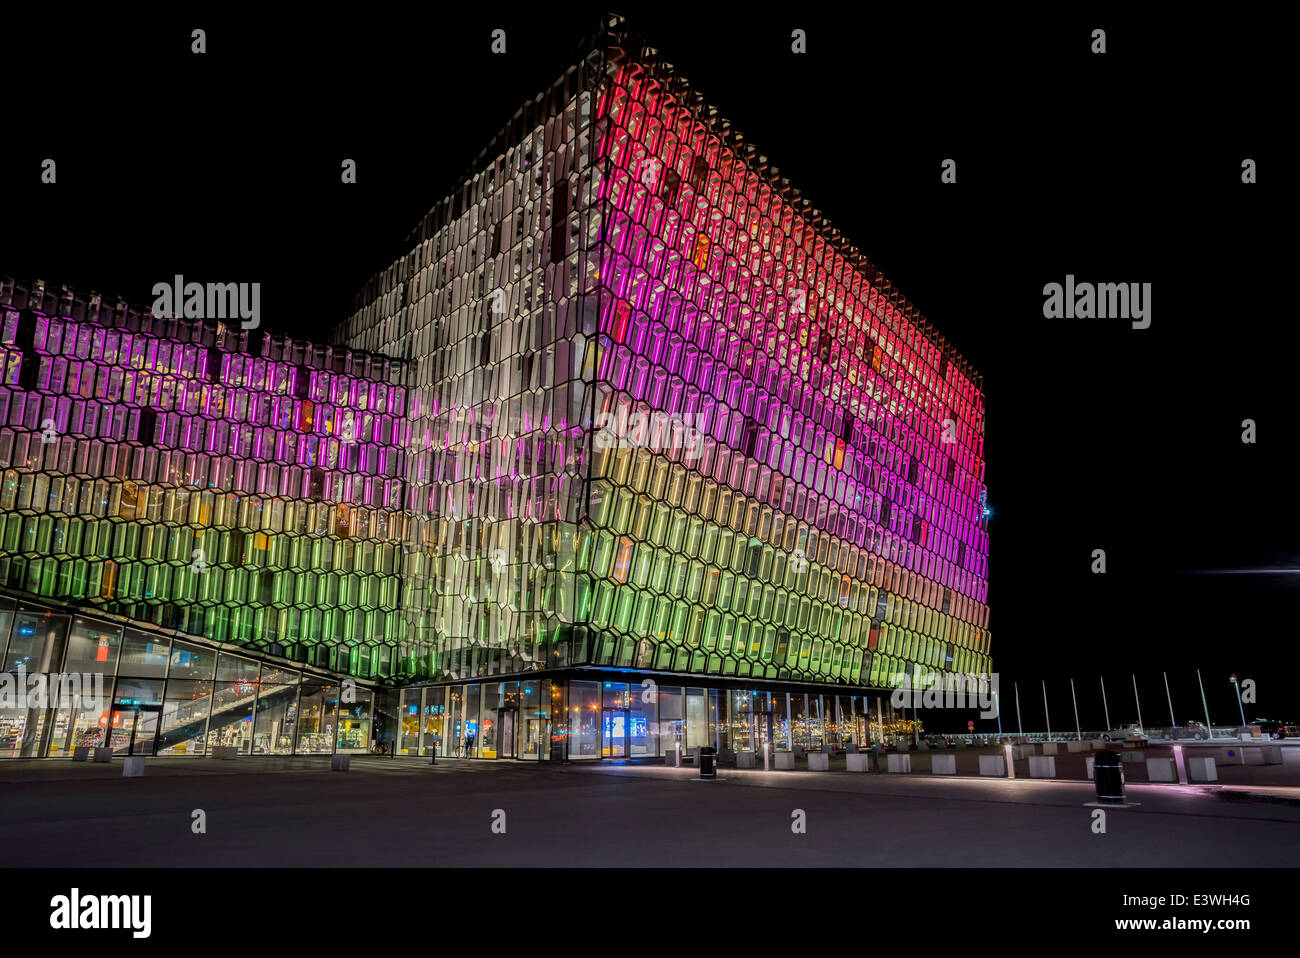 Harpa Concert and Conference Hall at night, Reykjavik, Iceland Festive lights during the annual Winter Lights Celebration. Stock Photo